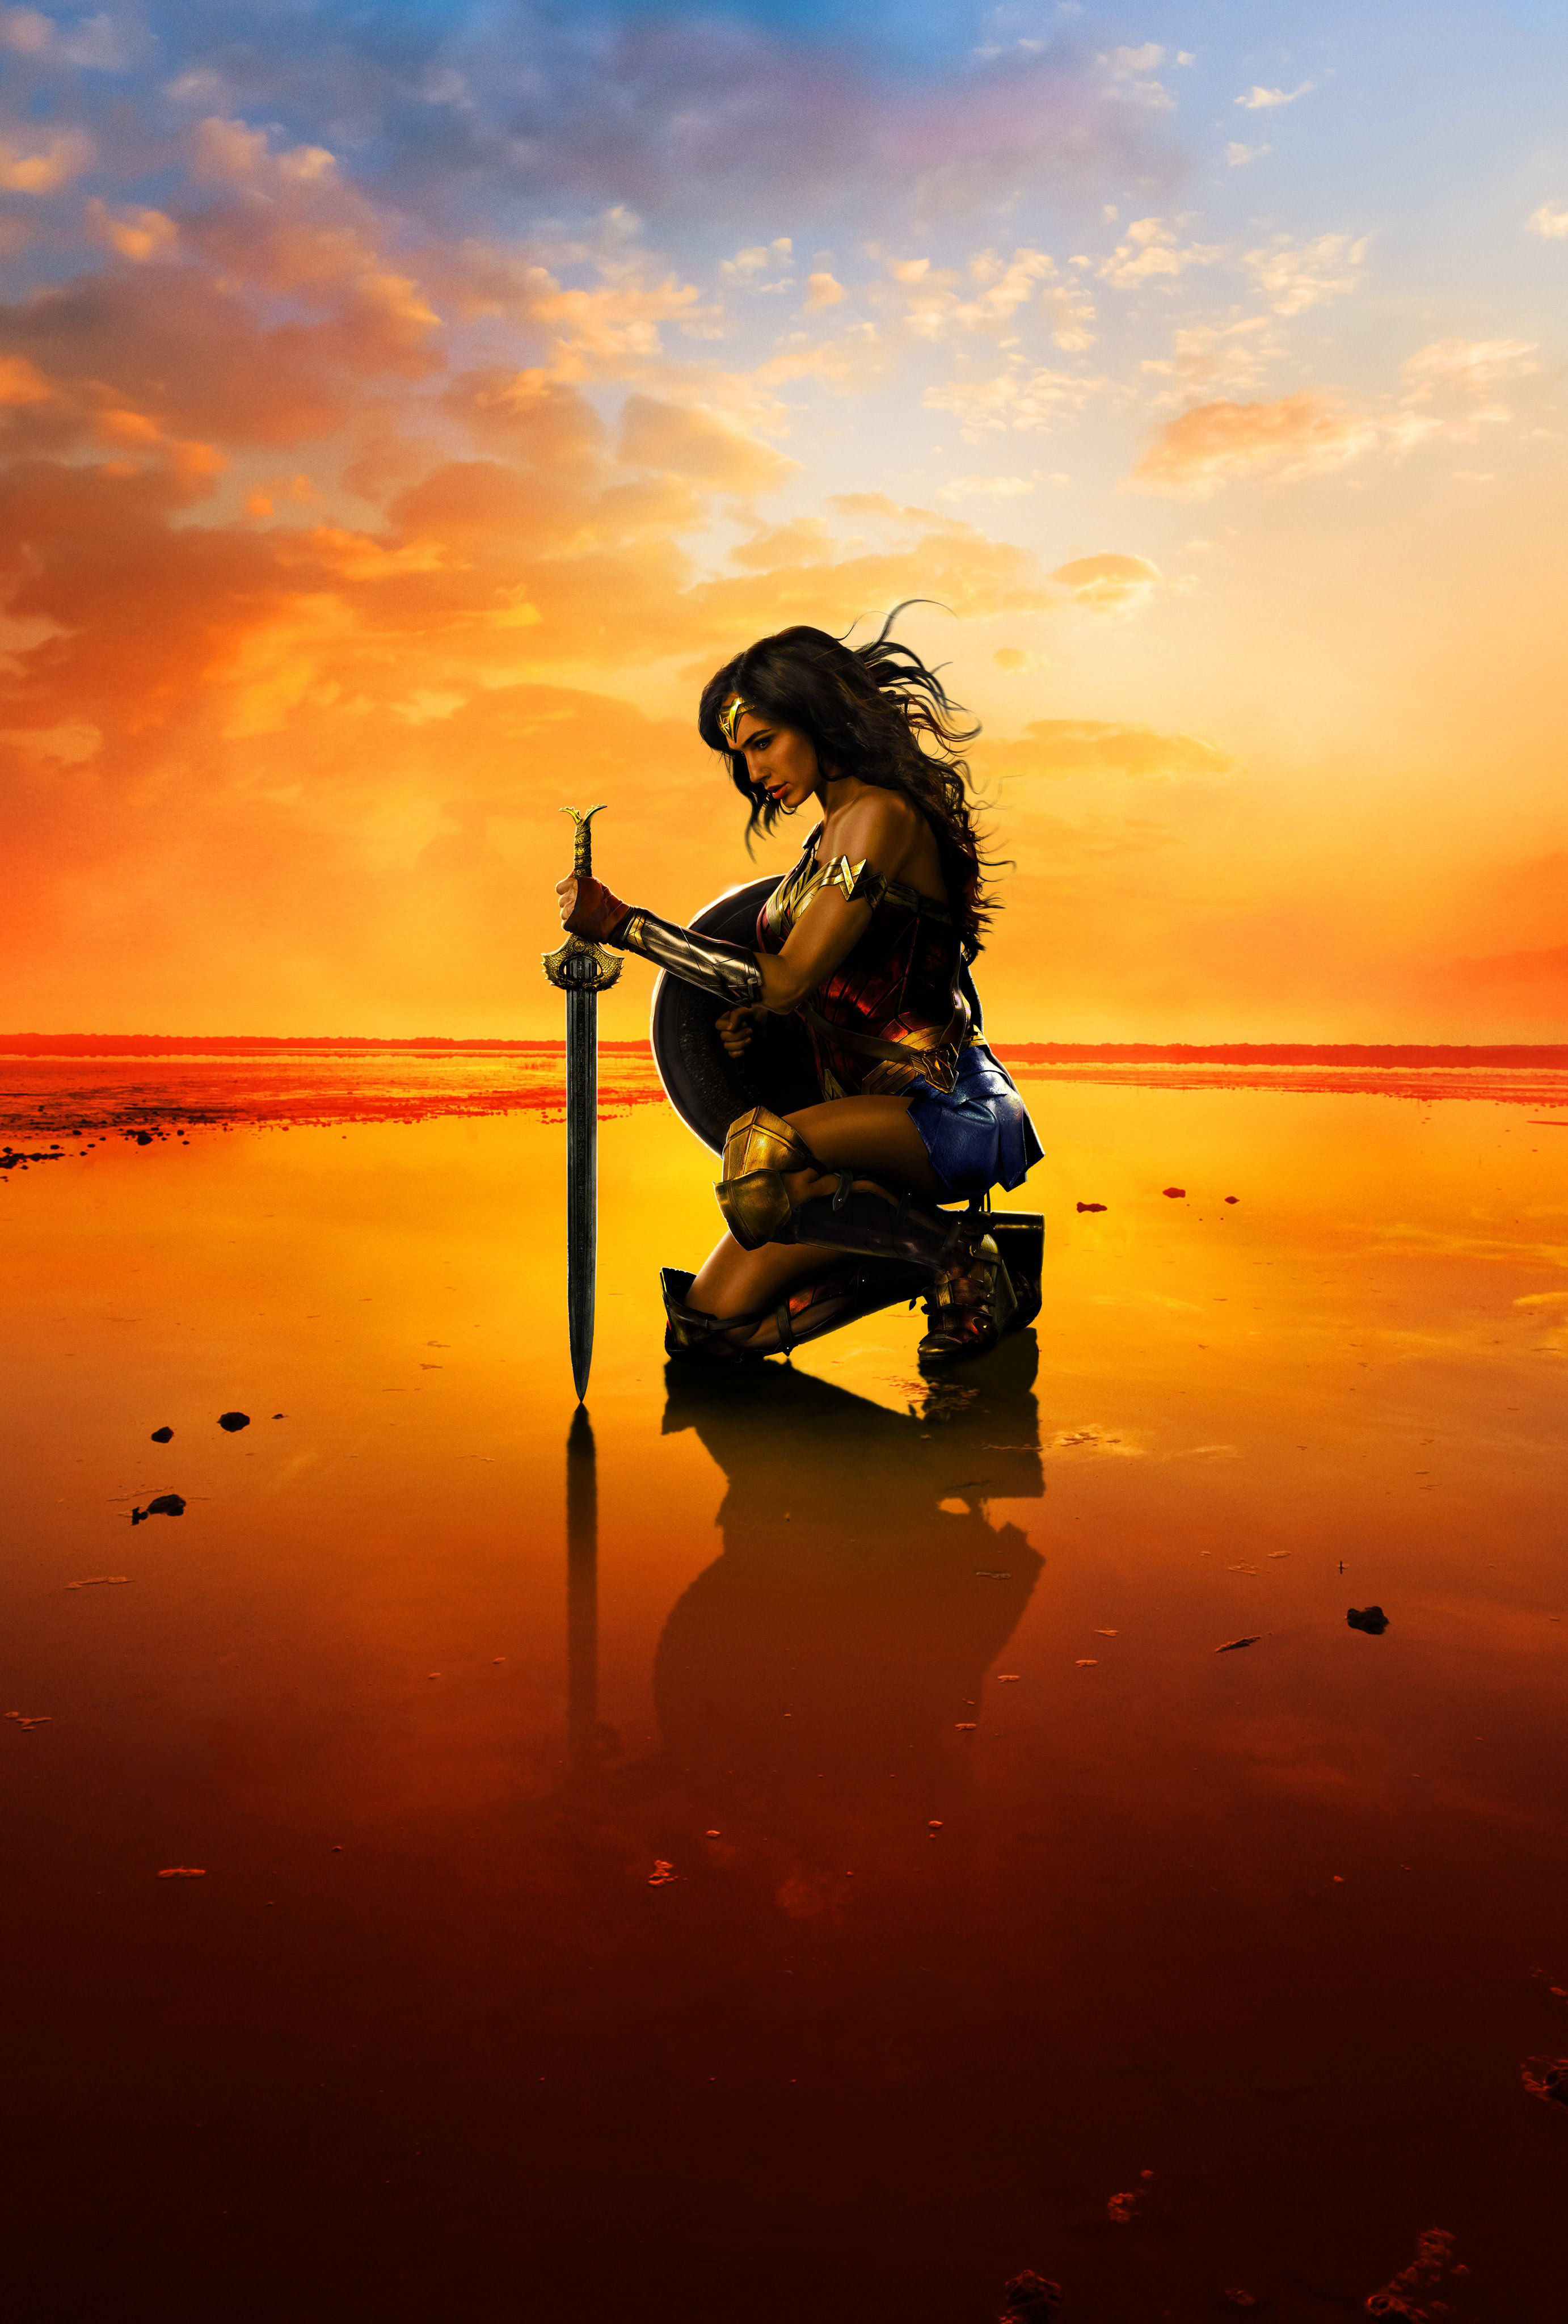 People 2764x4096 movie poster Wonder Woman portrait display Gal Gadot women DC Extended Universe superheroines kneeling sword girls with guns women with swords sky sunlight movies reflection clouds